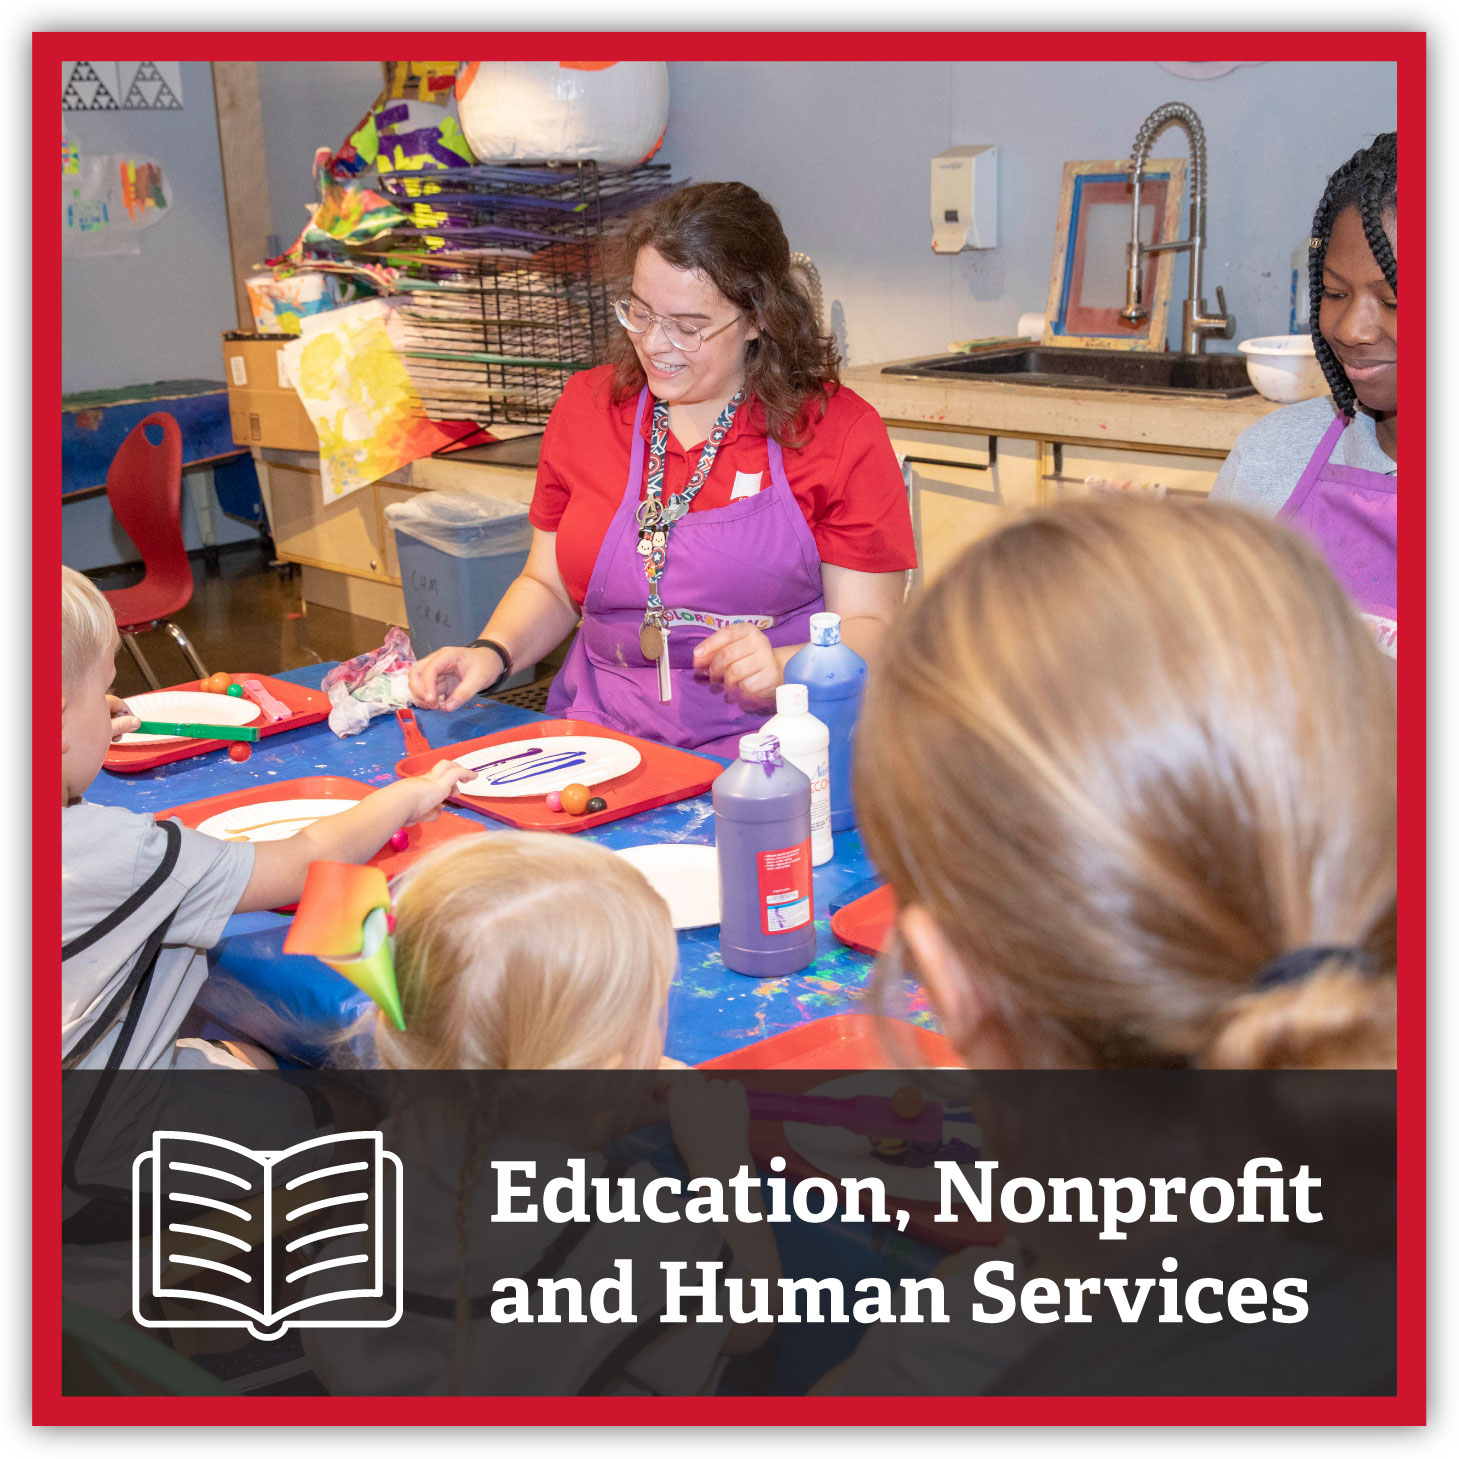 Woman working with children in classroom, Nonprofit and Human Services.